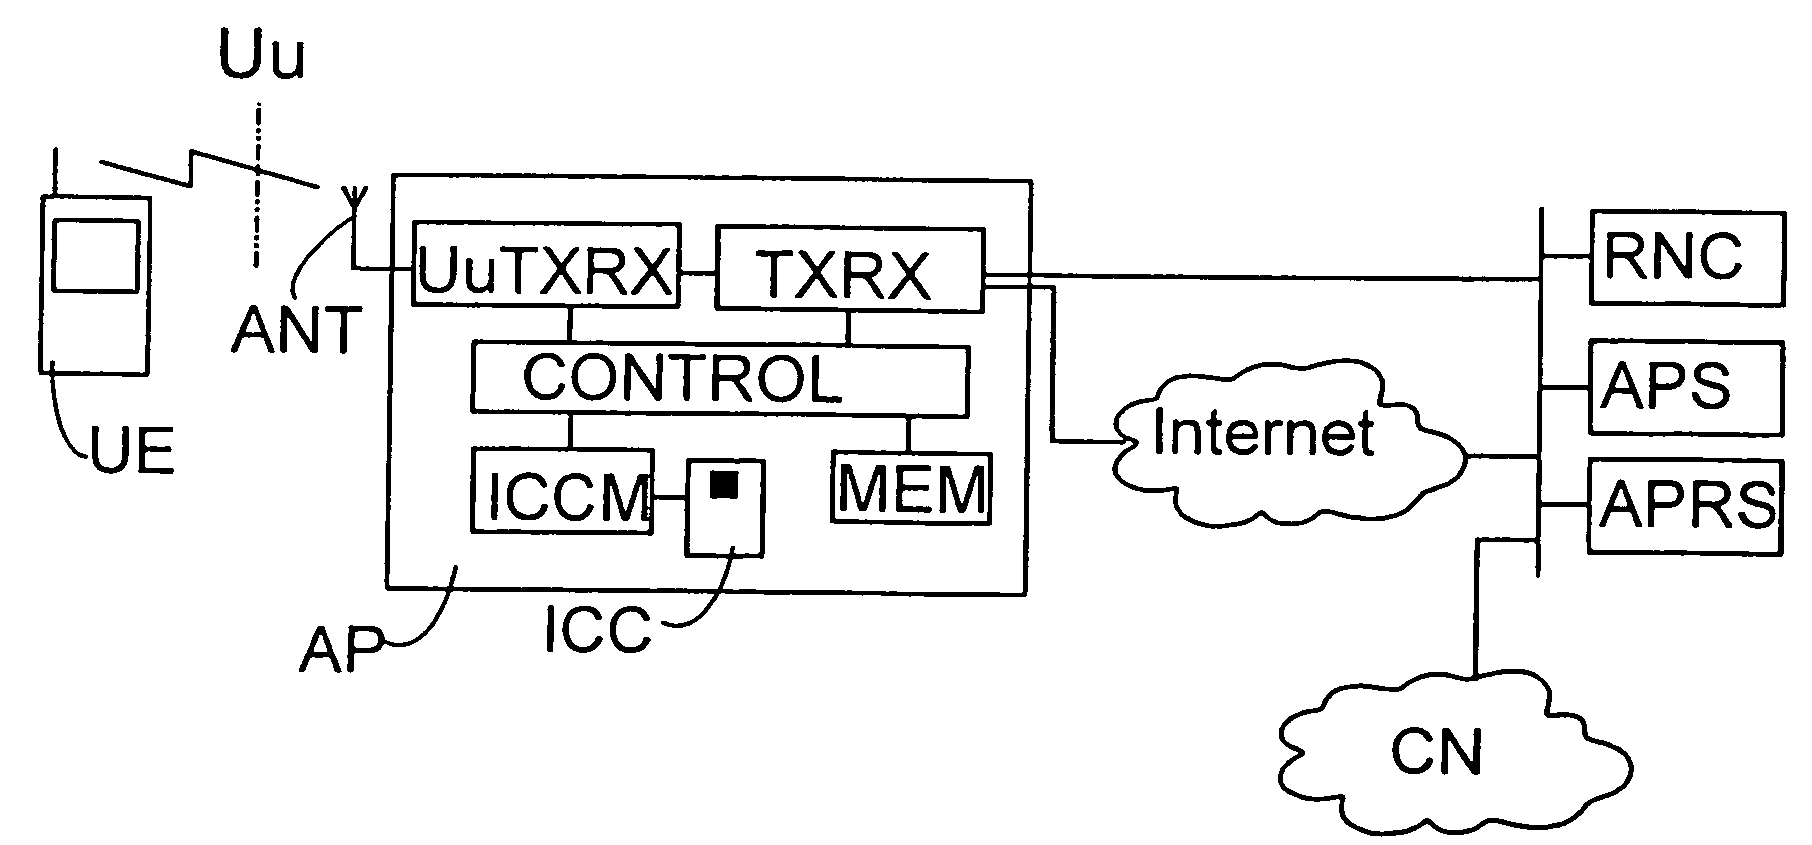 Connecting access points in wireless telecommunications systems